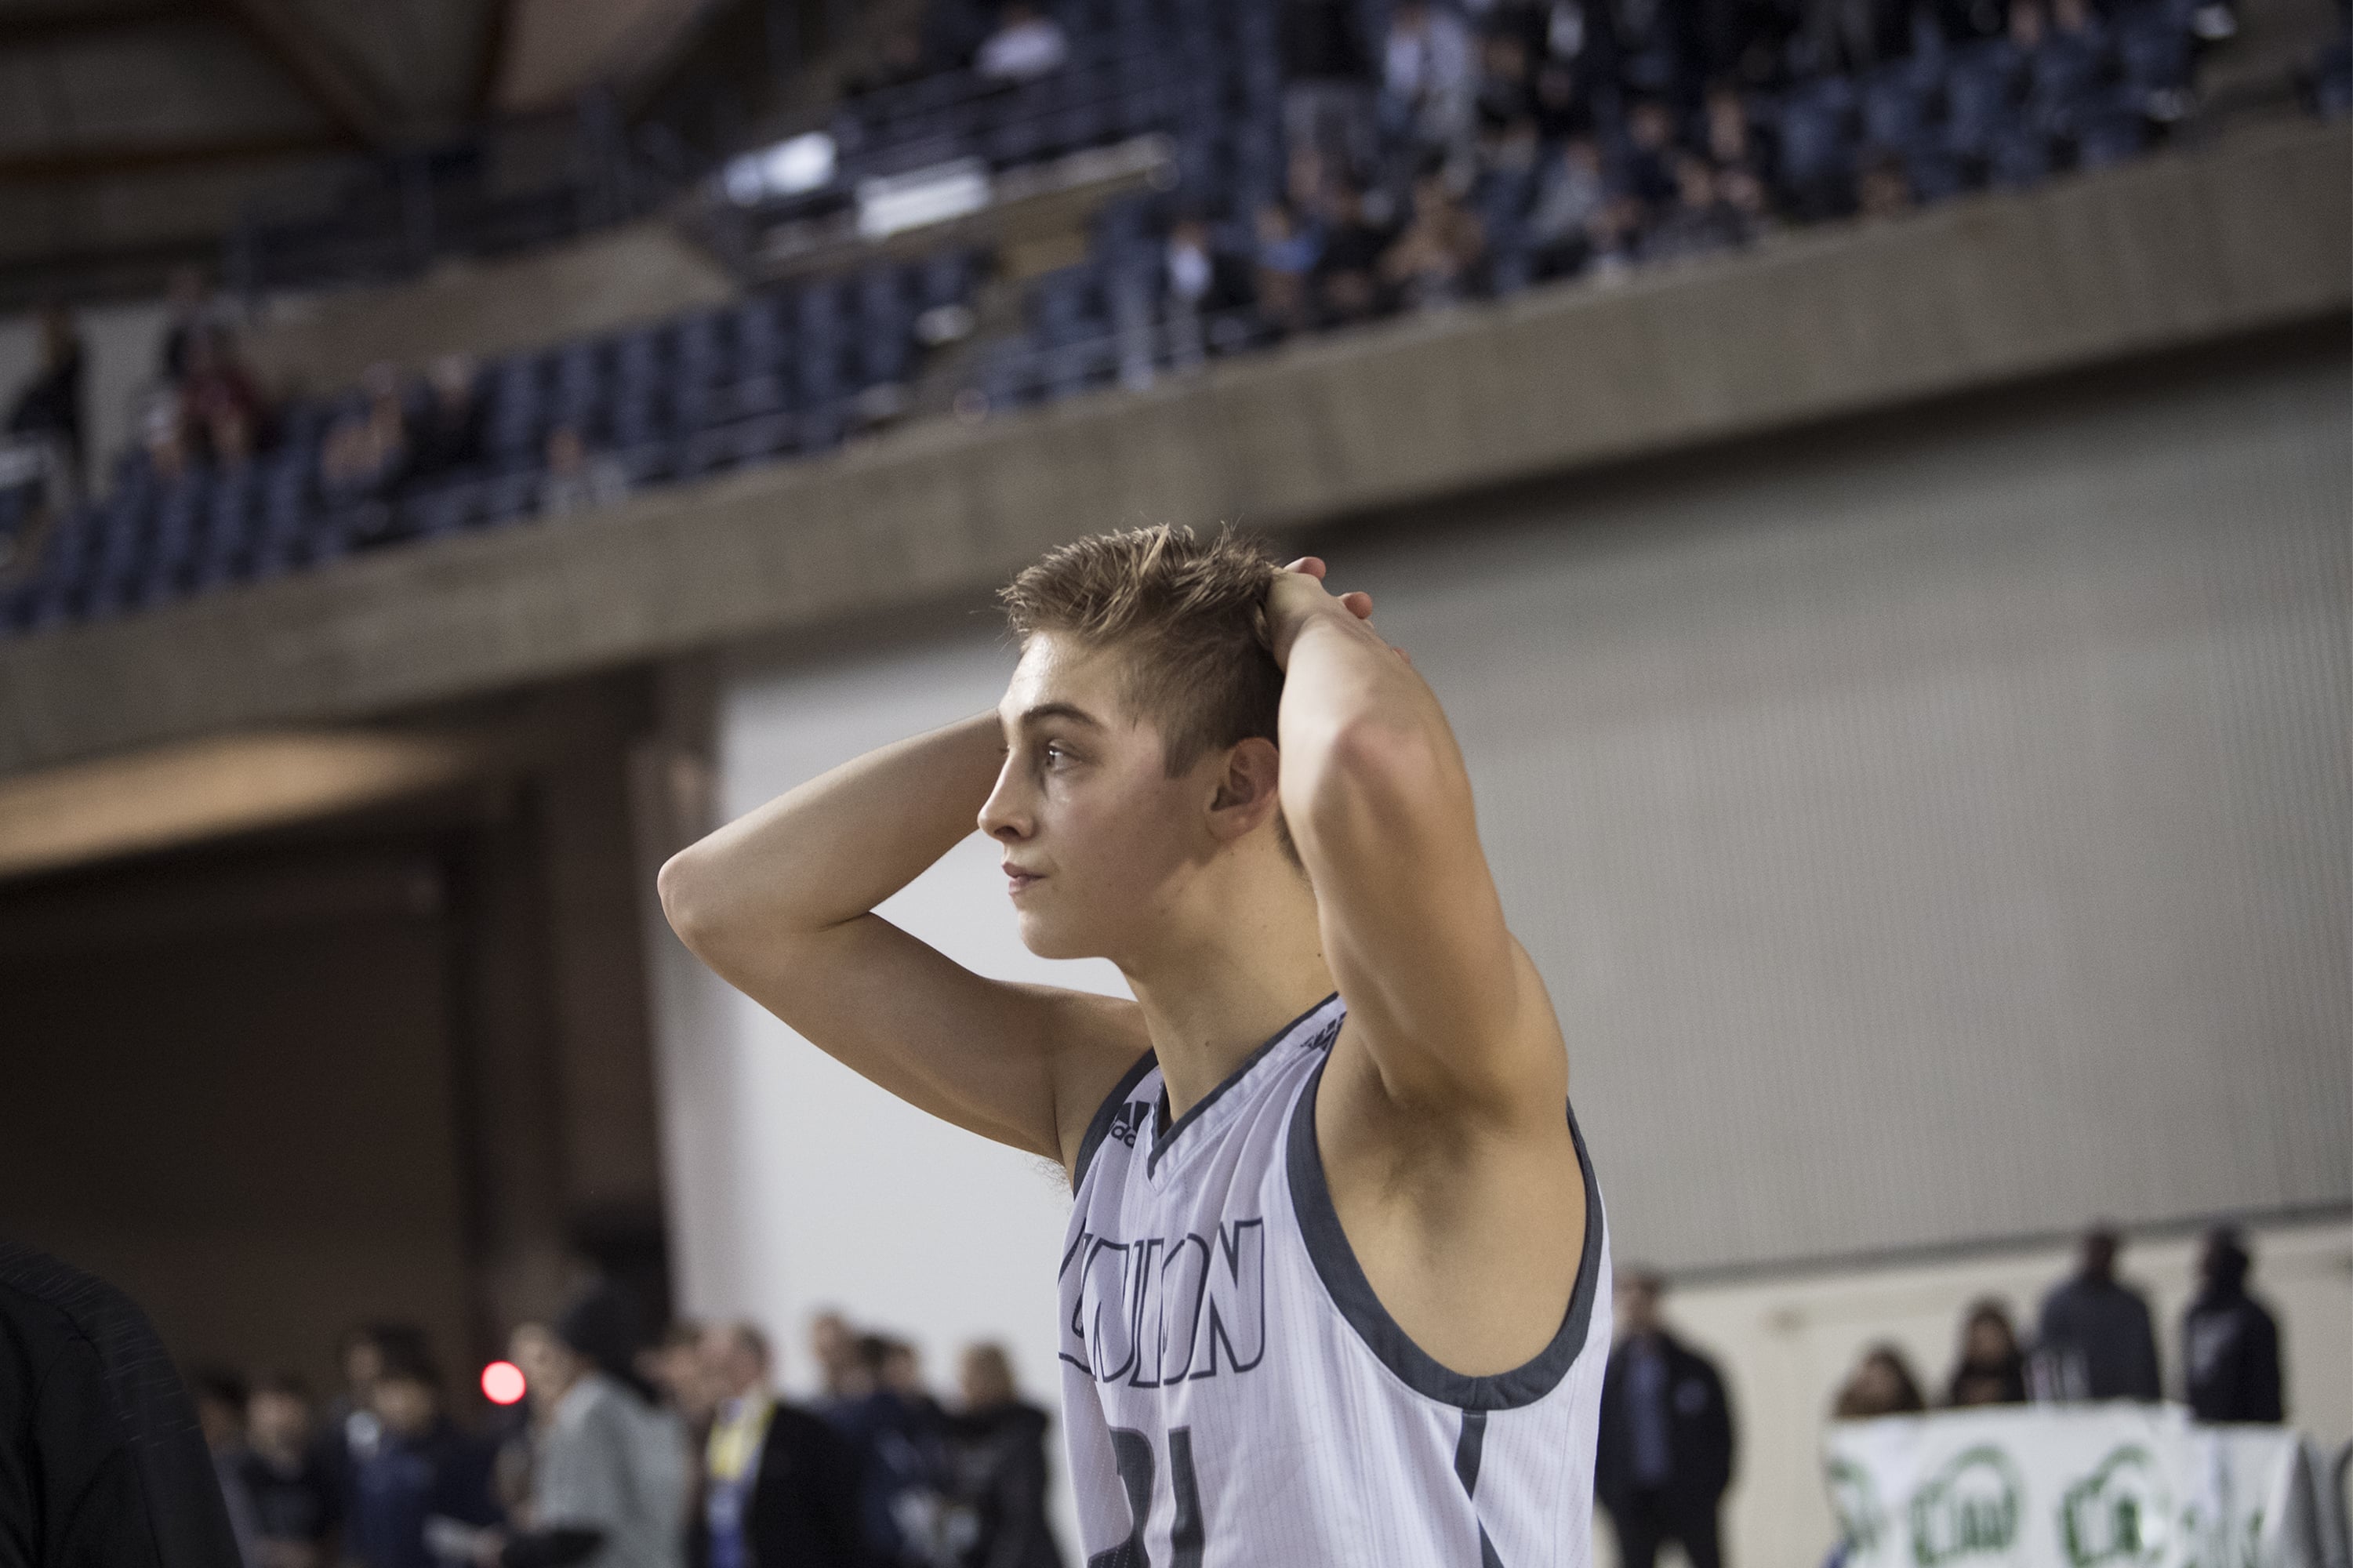 Union's Tanner Toolson reacts to the Titan's loss to the Curtis Vikings during the 4A Hardwood Classic at the Tacoma Dome on Thursday, Feb. 28, 2019.